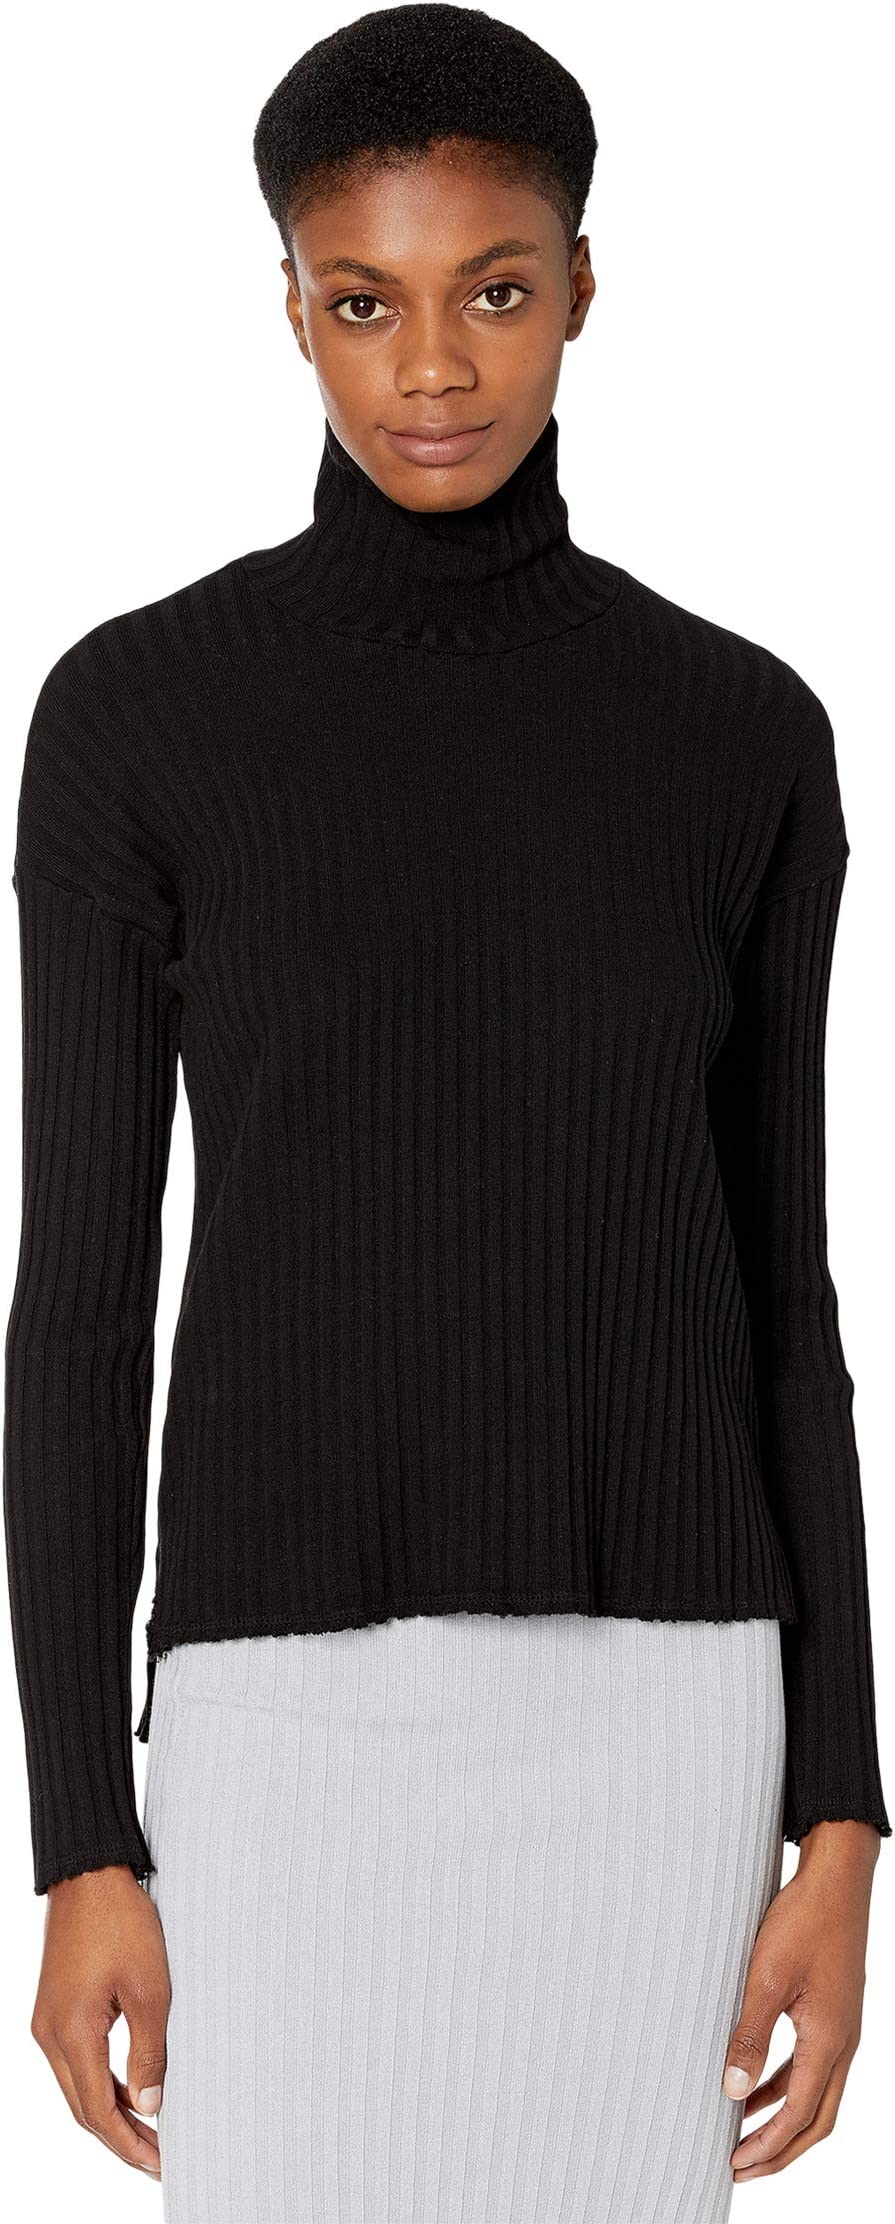 LAmade Hill Chunky Rib Turtleneck cheap - for All the people